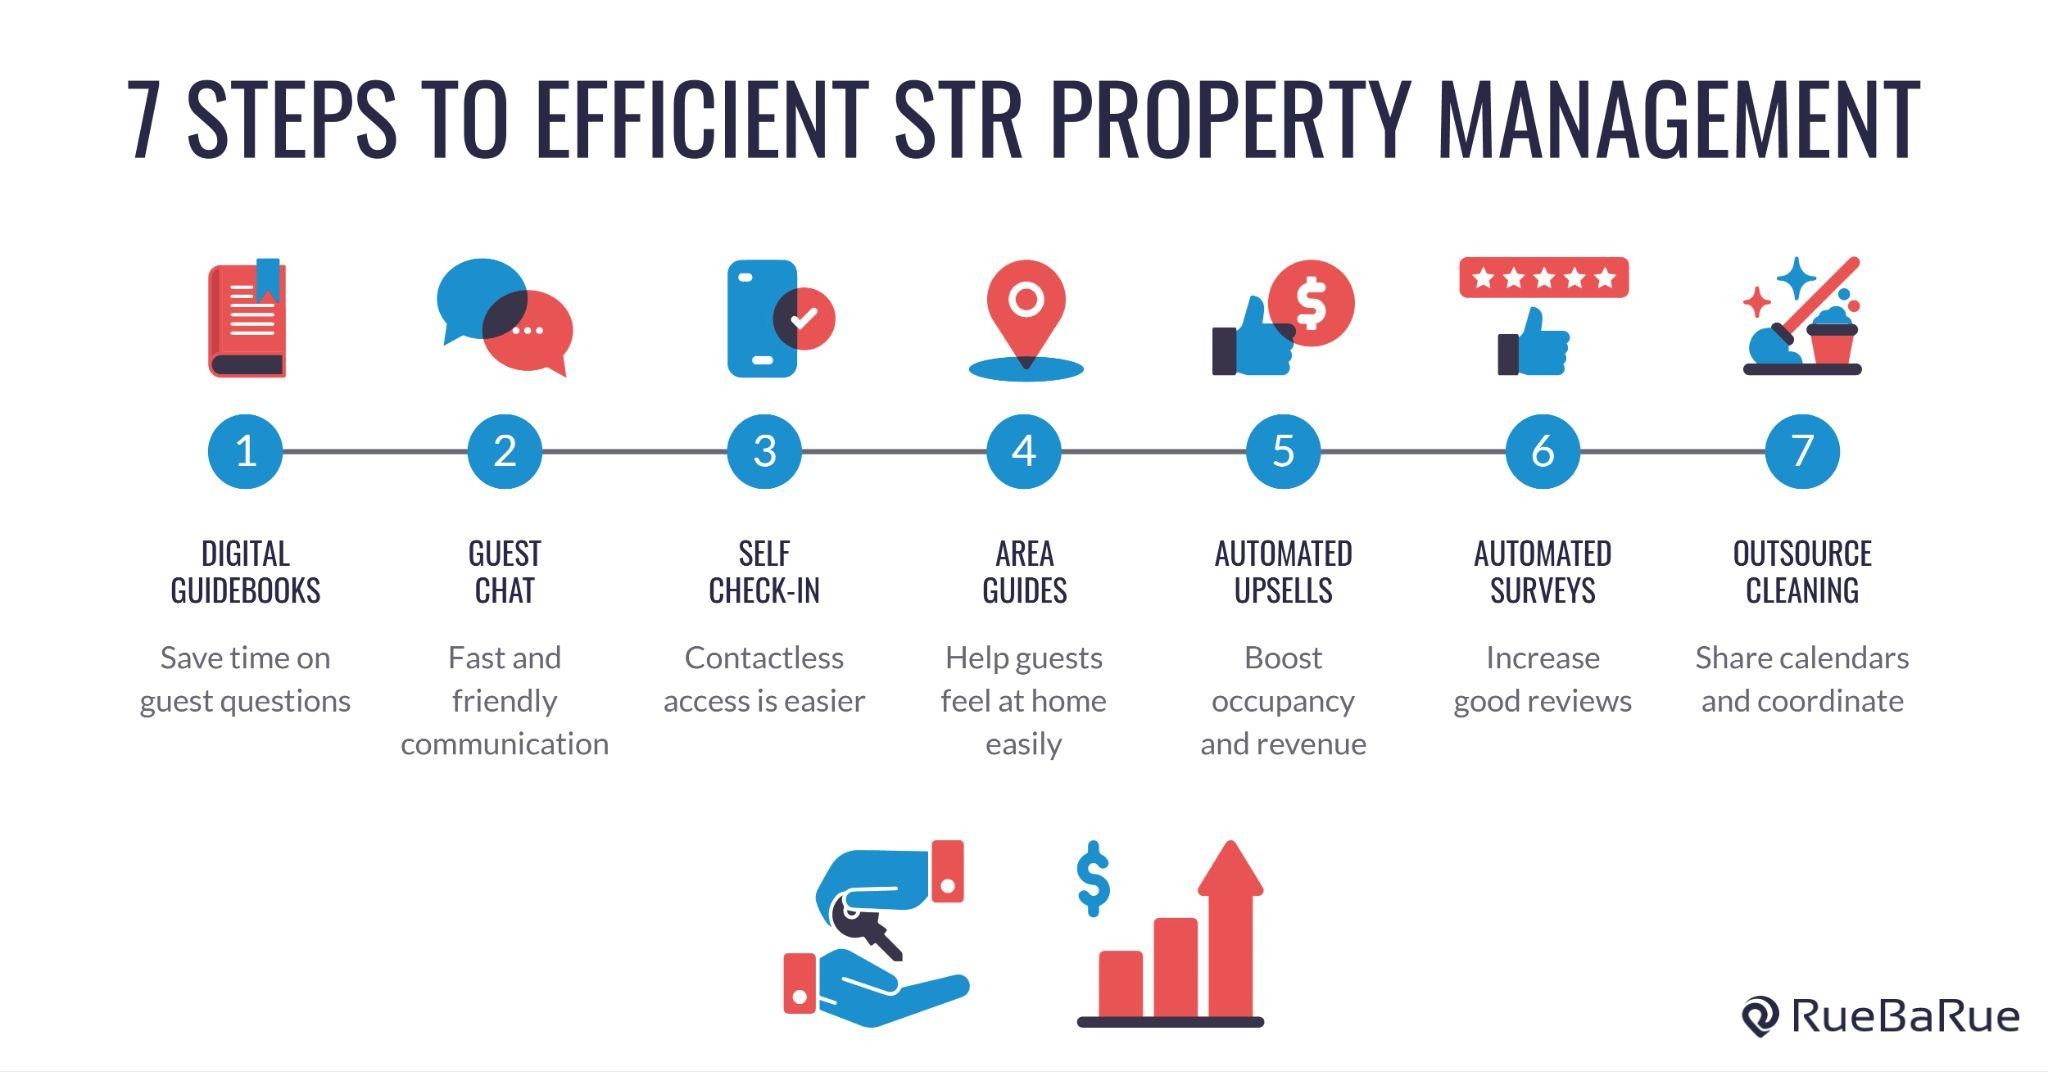 A graphic showing 7 steps to efficient STR property management including 7 steps with icons summarizing the steps above 